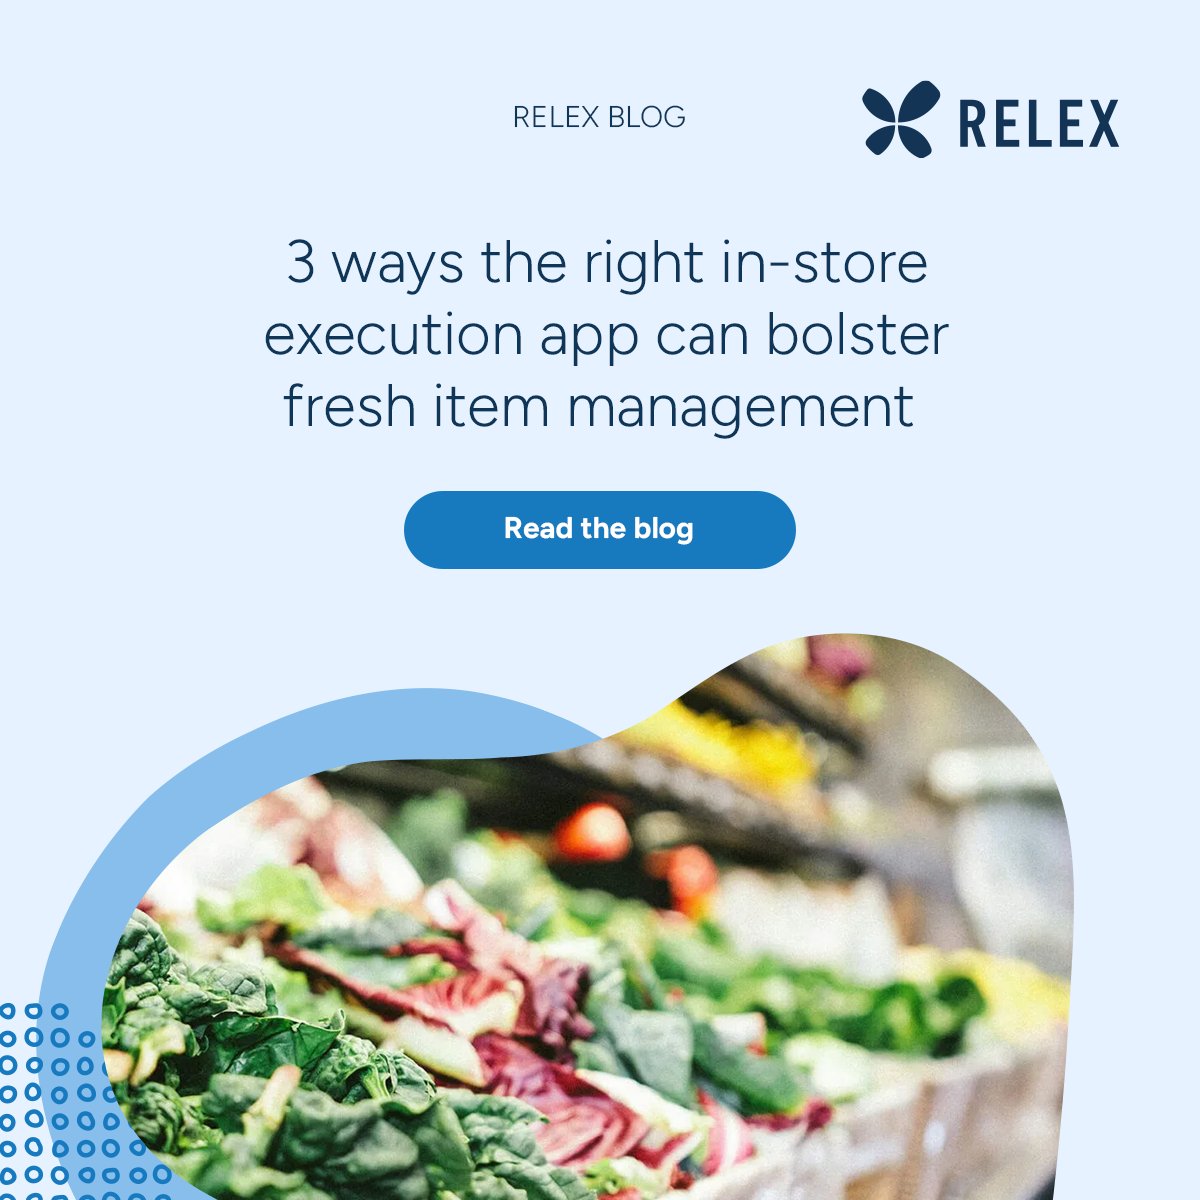 Struggling with fresh item management in grocery retail? See how RELEX Mobile Pro can help balance priorities for fresher foods, happier customers, and healthier bottom lines. relexsolutions.com/resources/fres… #grocery #retail #supplychain